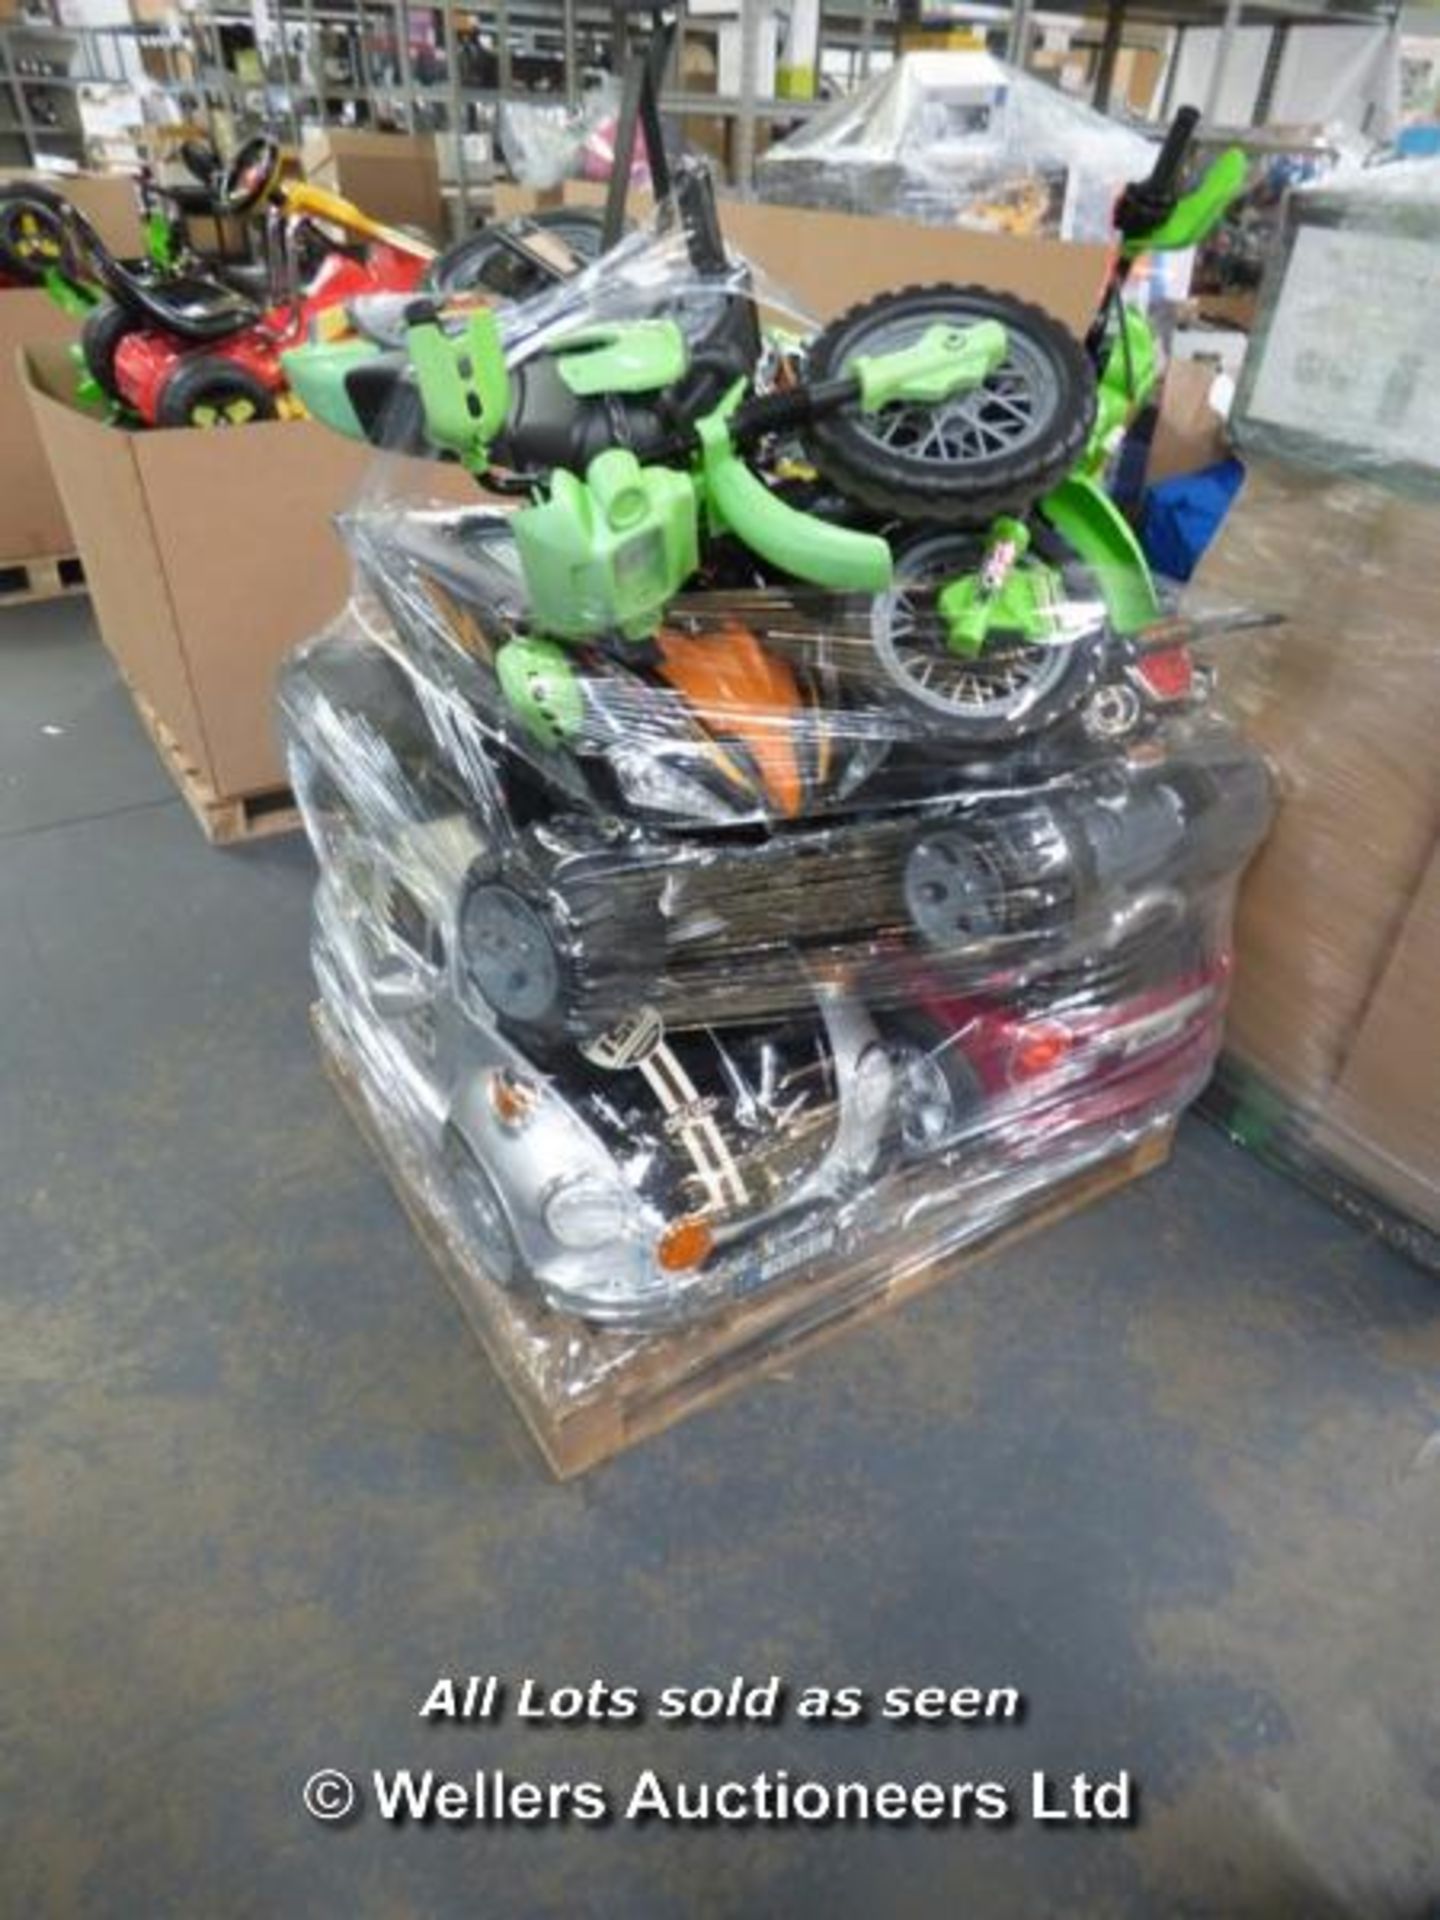 PALLET OF 6X KIDS RIDE ON ELECTRONIC INCLUDING QUAD BIKE, MINI COOPER, VW BEETLE ELECTRONIC RIDE